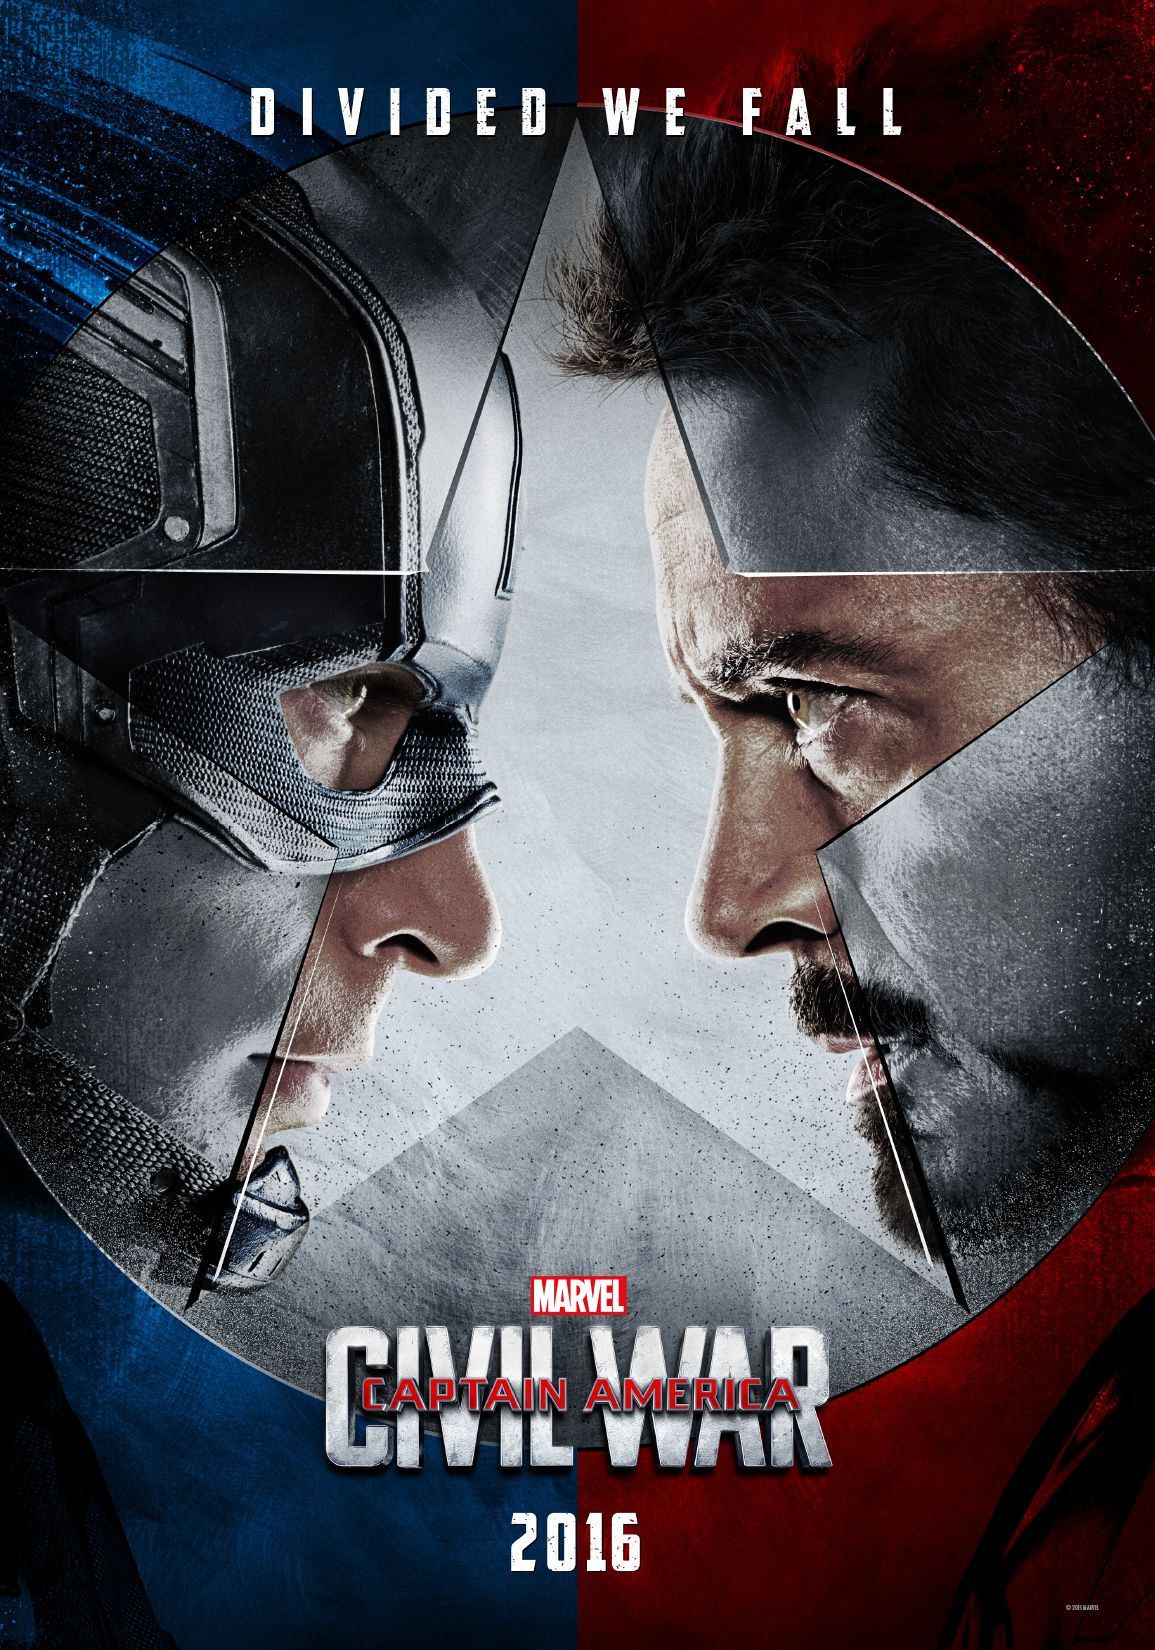 Captain America: Civil War tops the US box office on its opening weekend